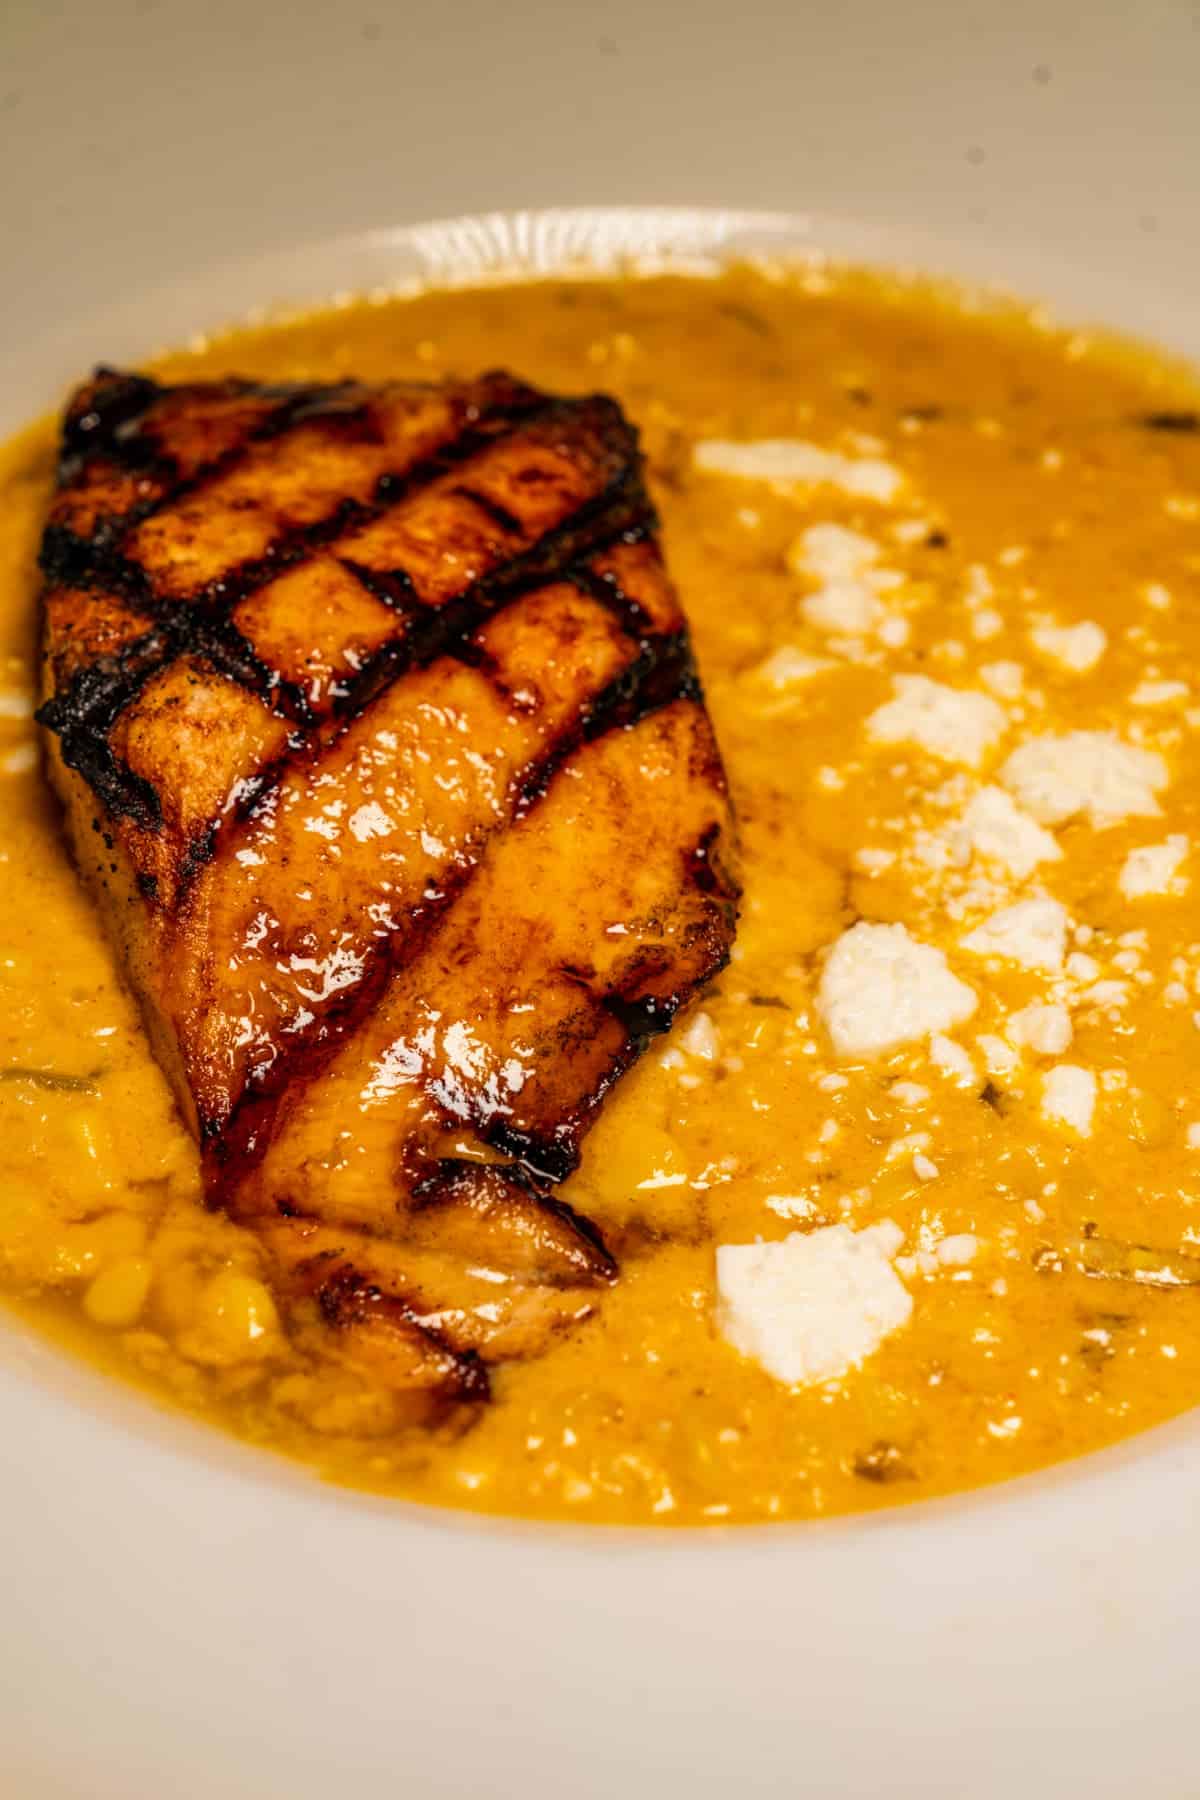 Salmon served with elote style cream corn